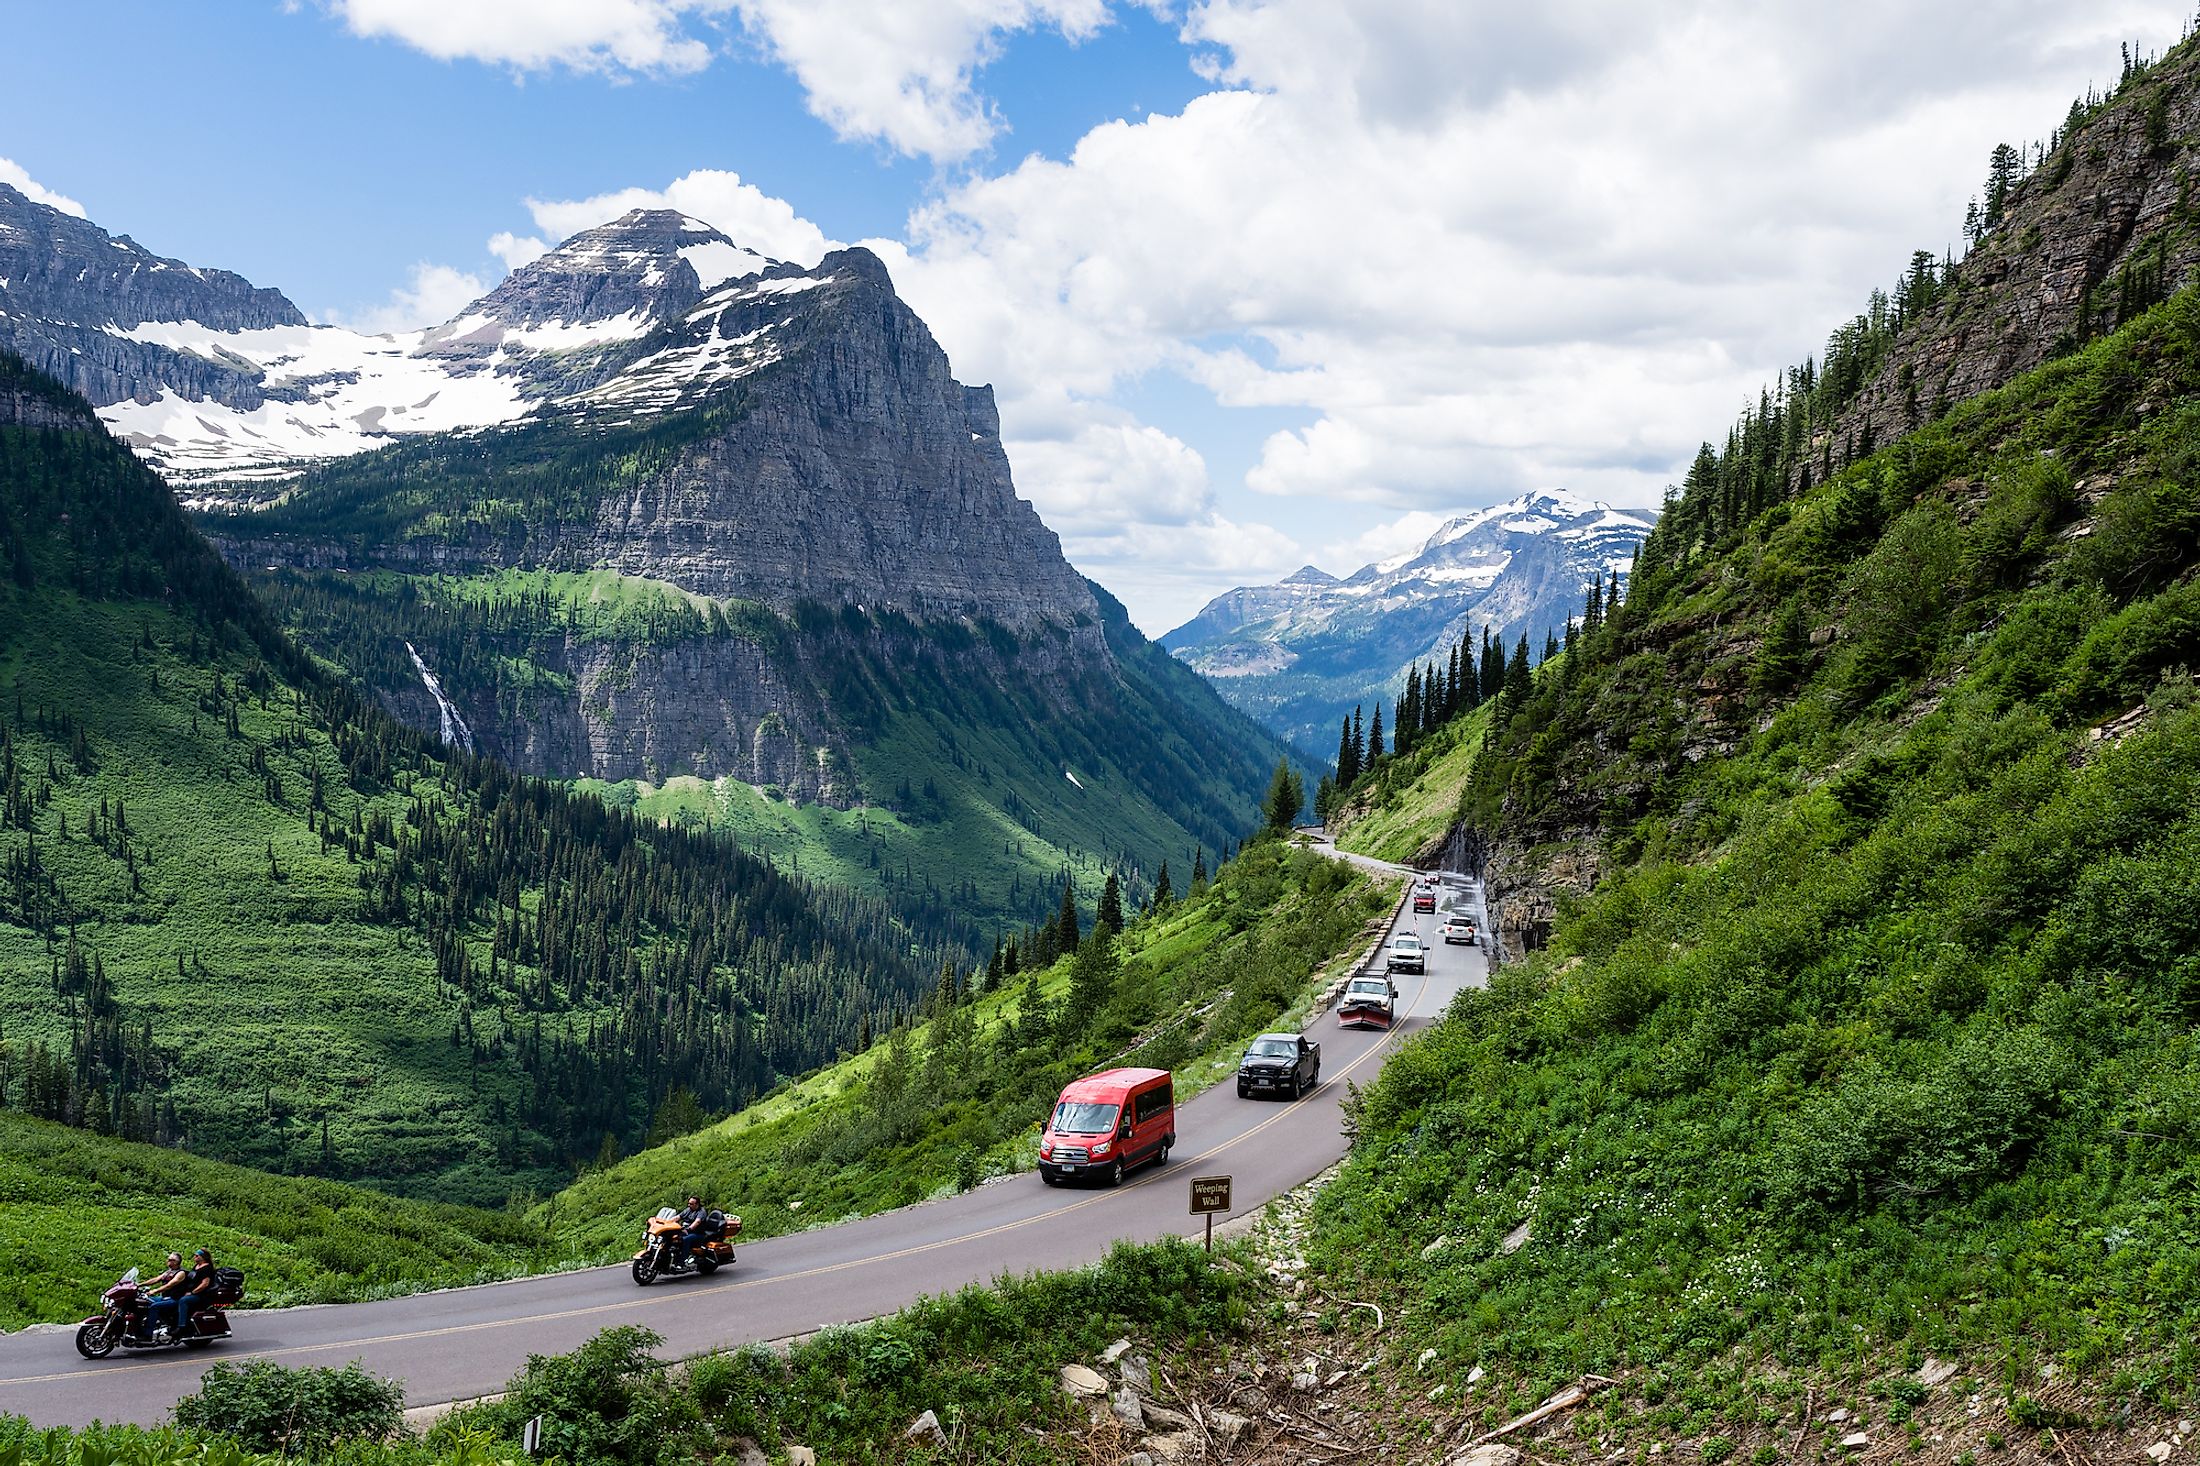 Going-to-the-Sun Road In Montana